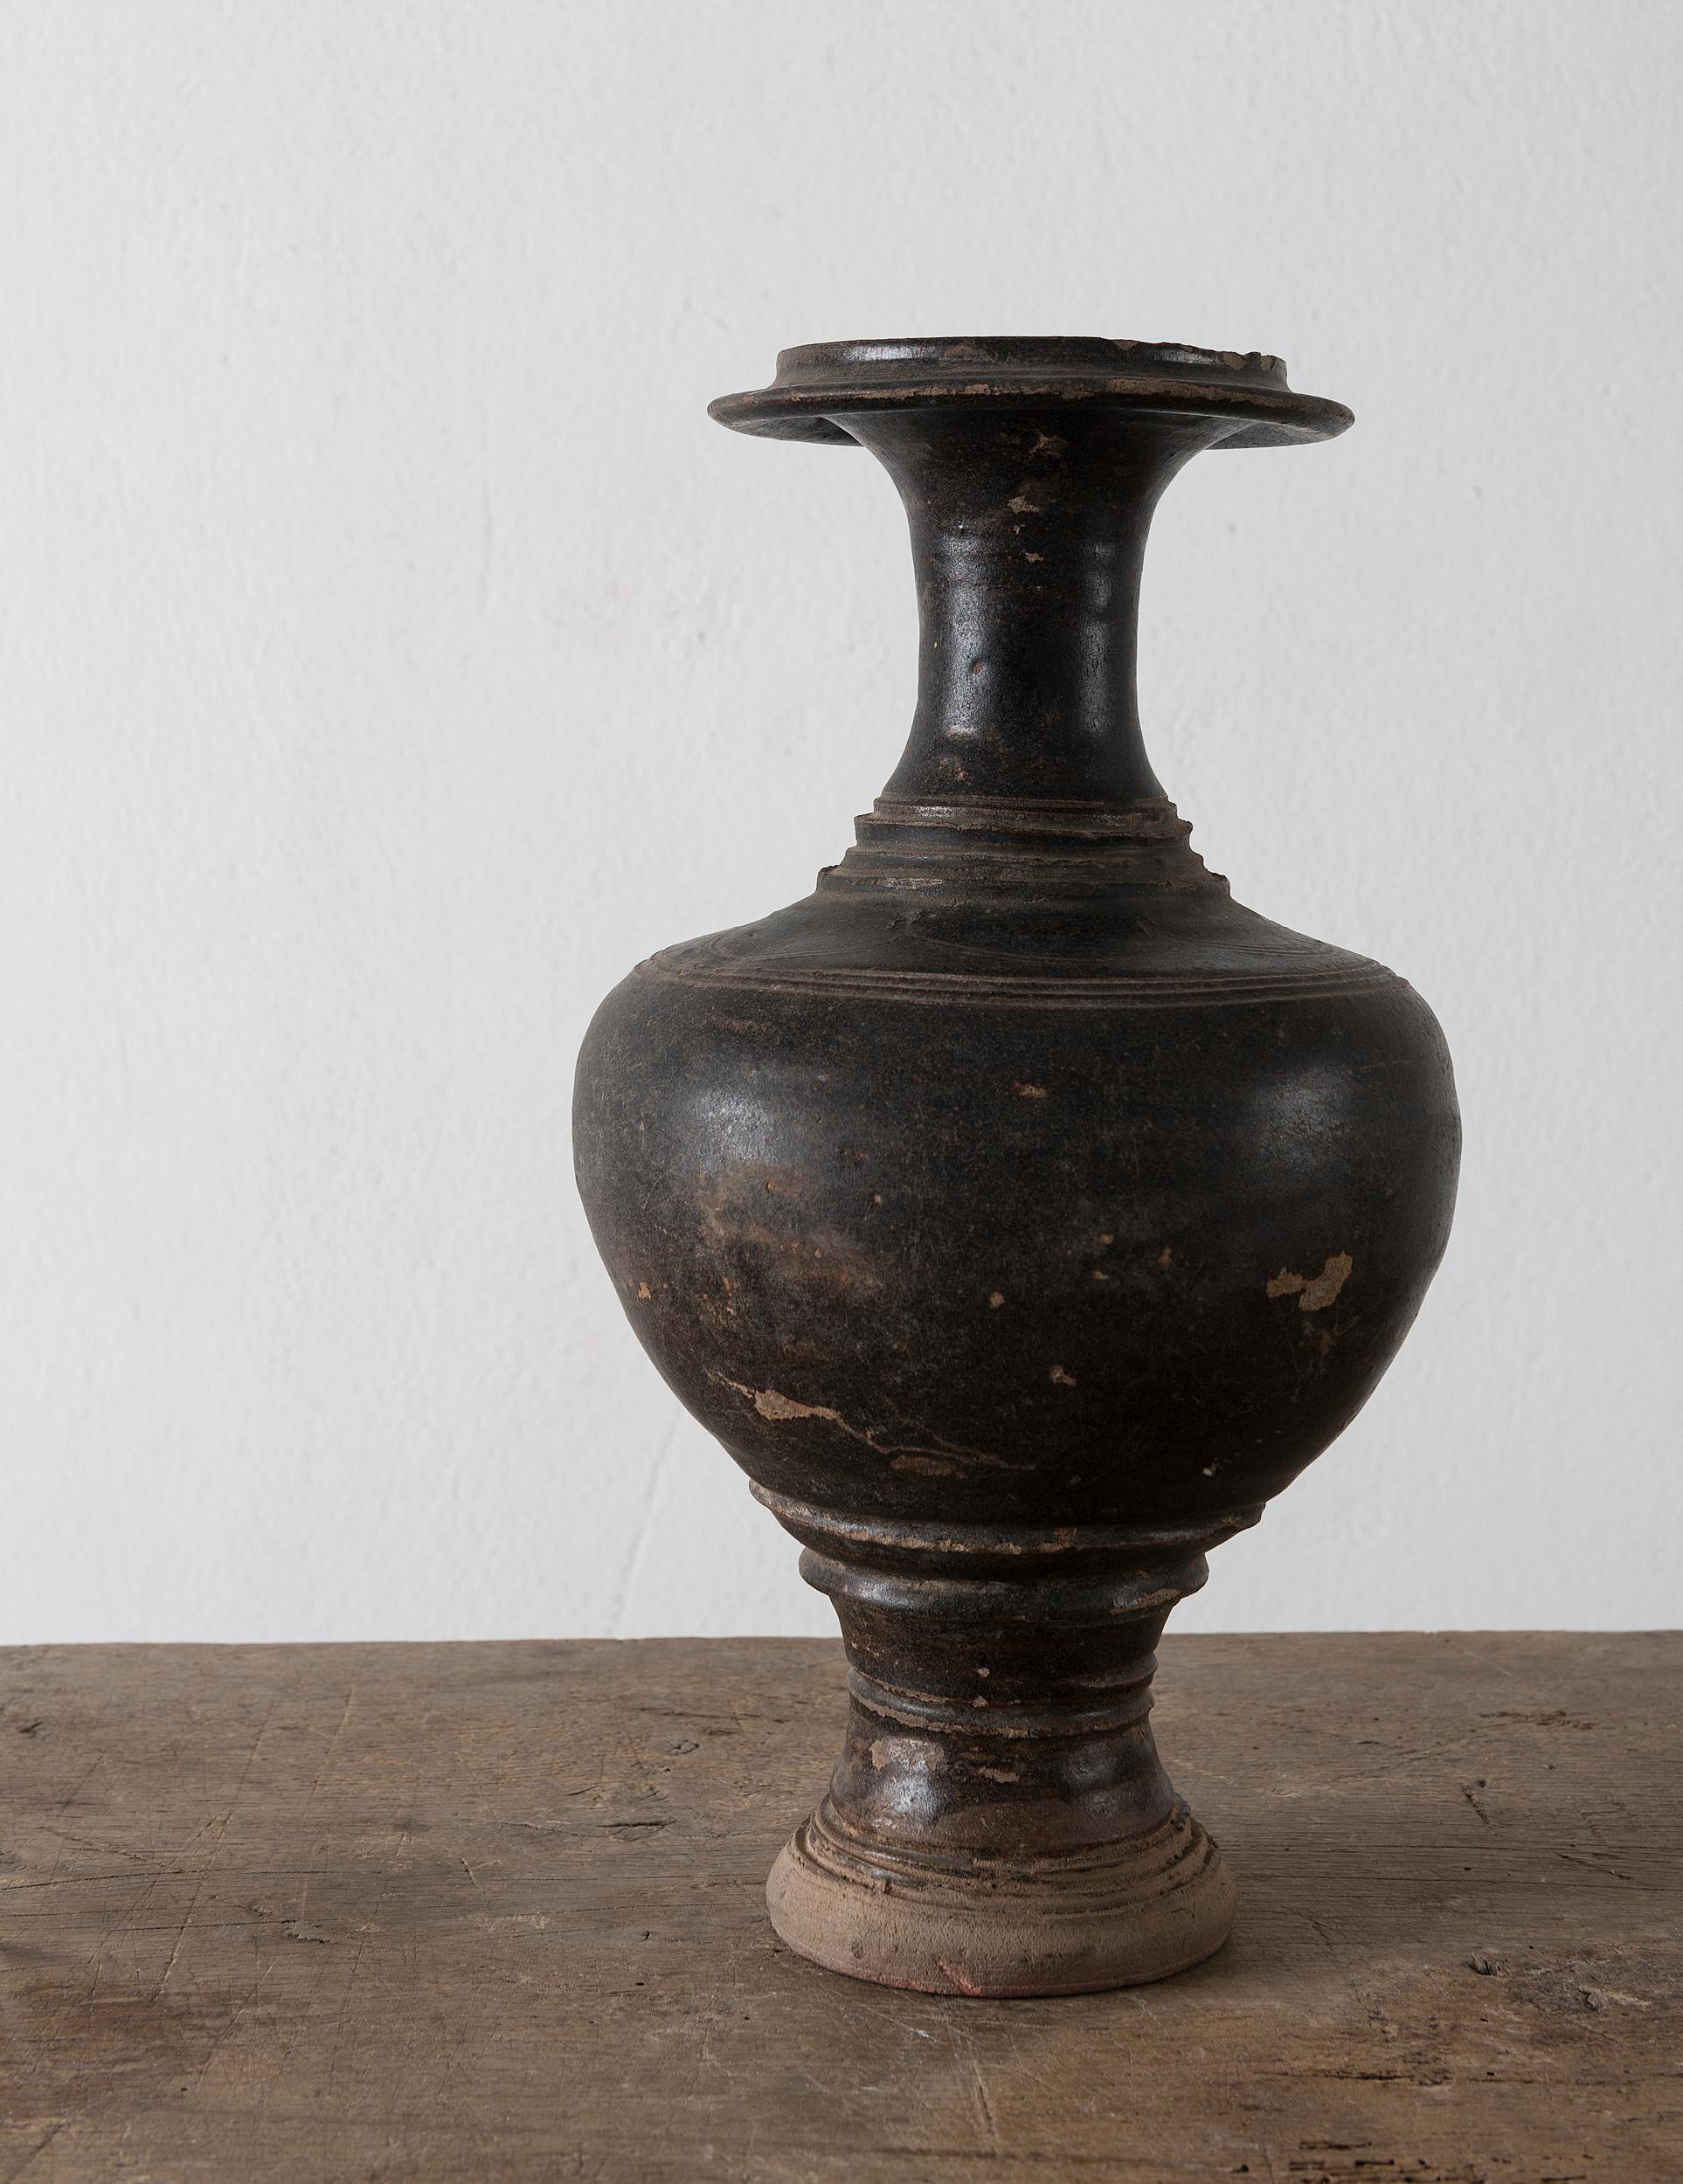 Unusual Near Pair of Khmer Vessels, Angkor Wat Period, 11th-12th Century In Good Condition For Sale In Jesteburg, DE